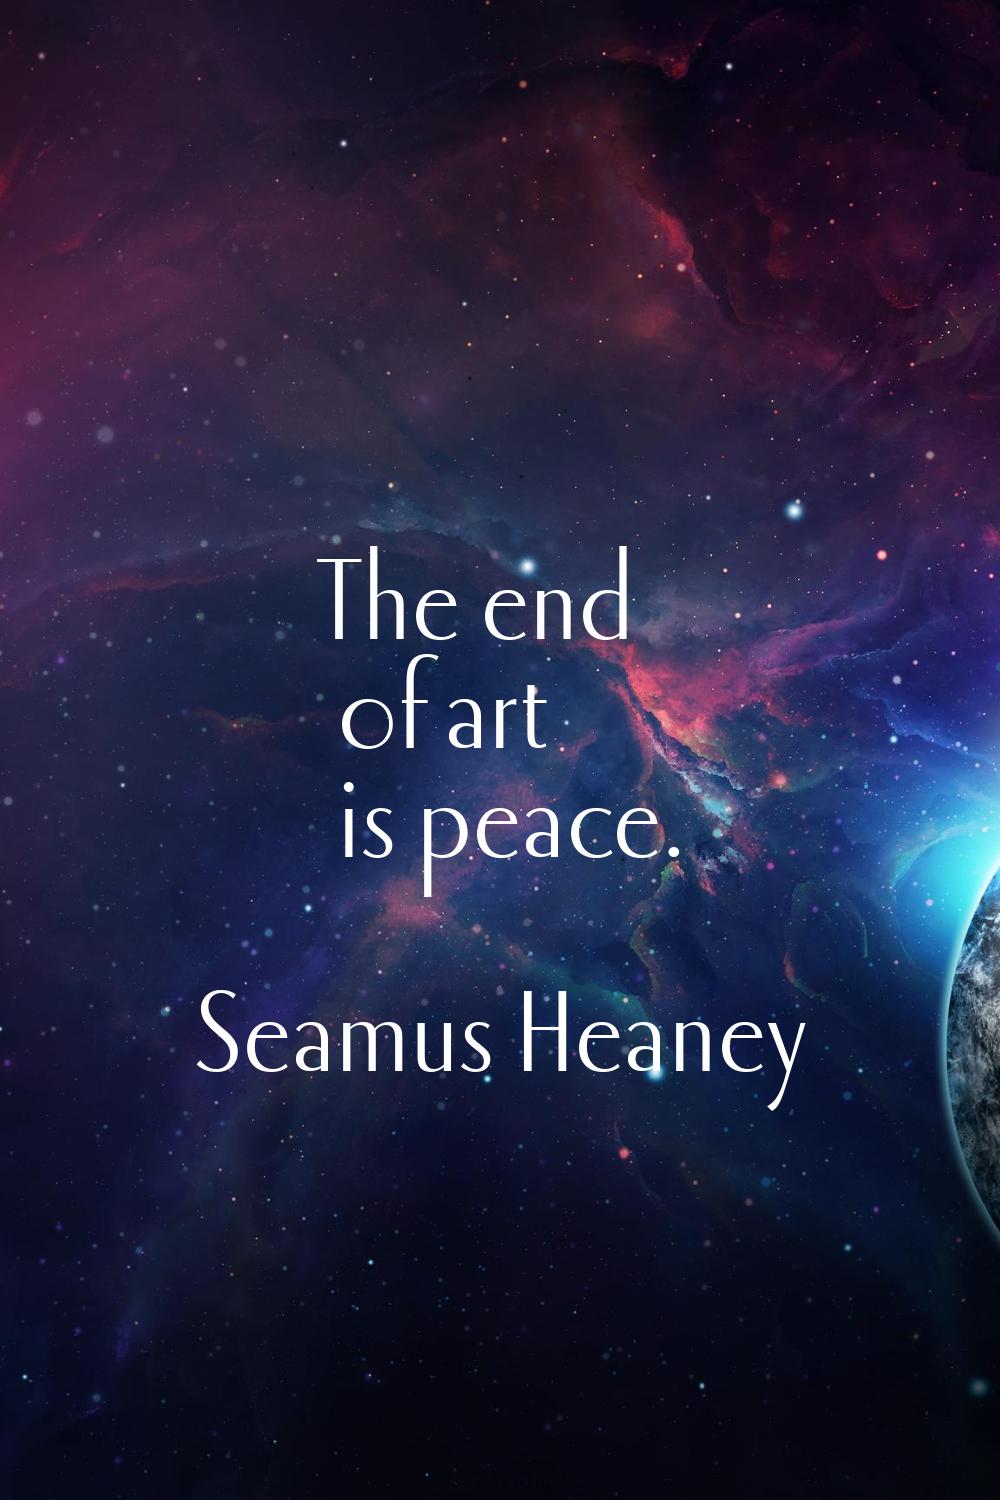 The end of art is peace.